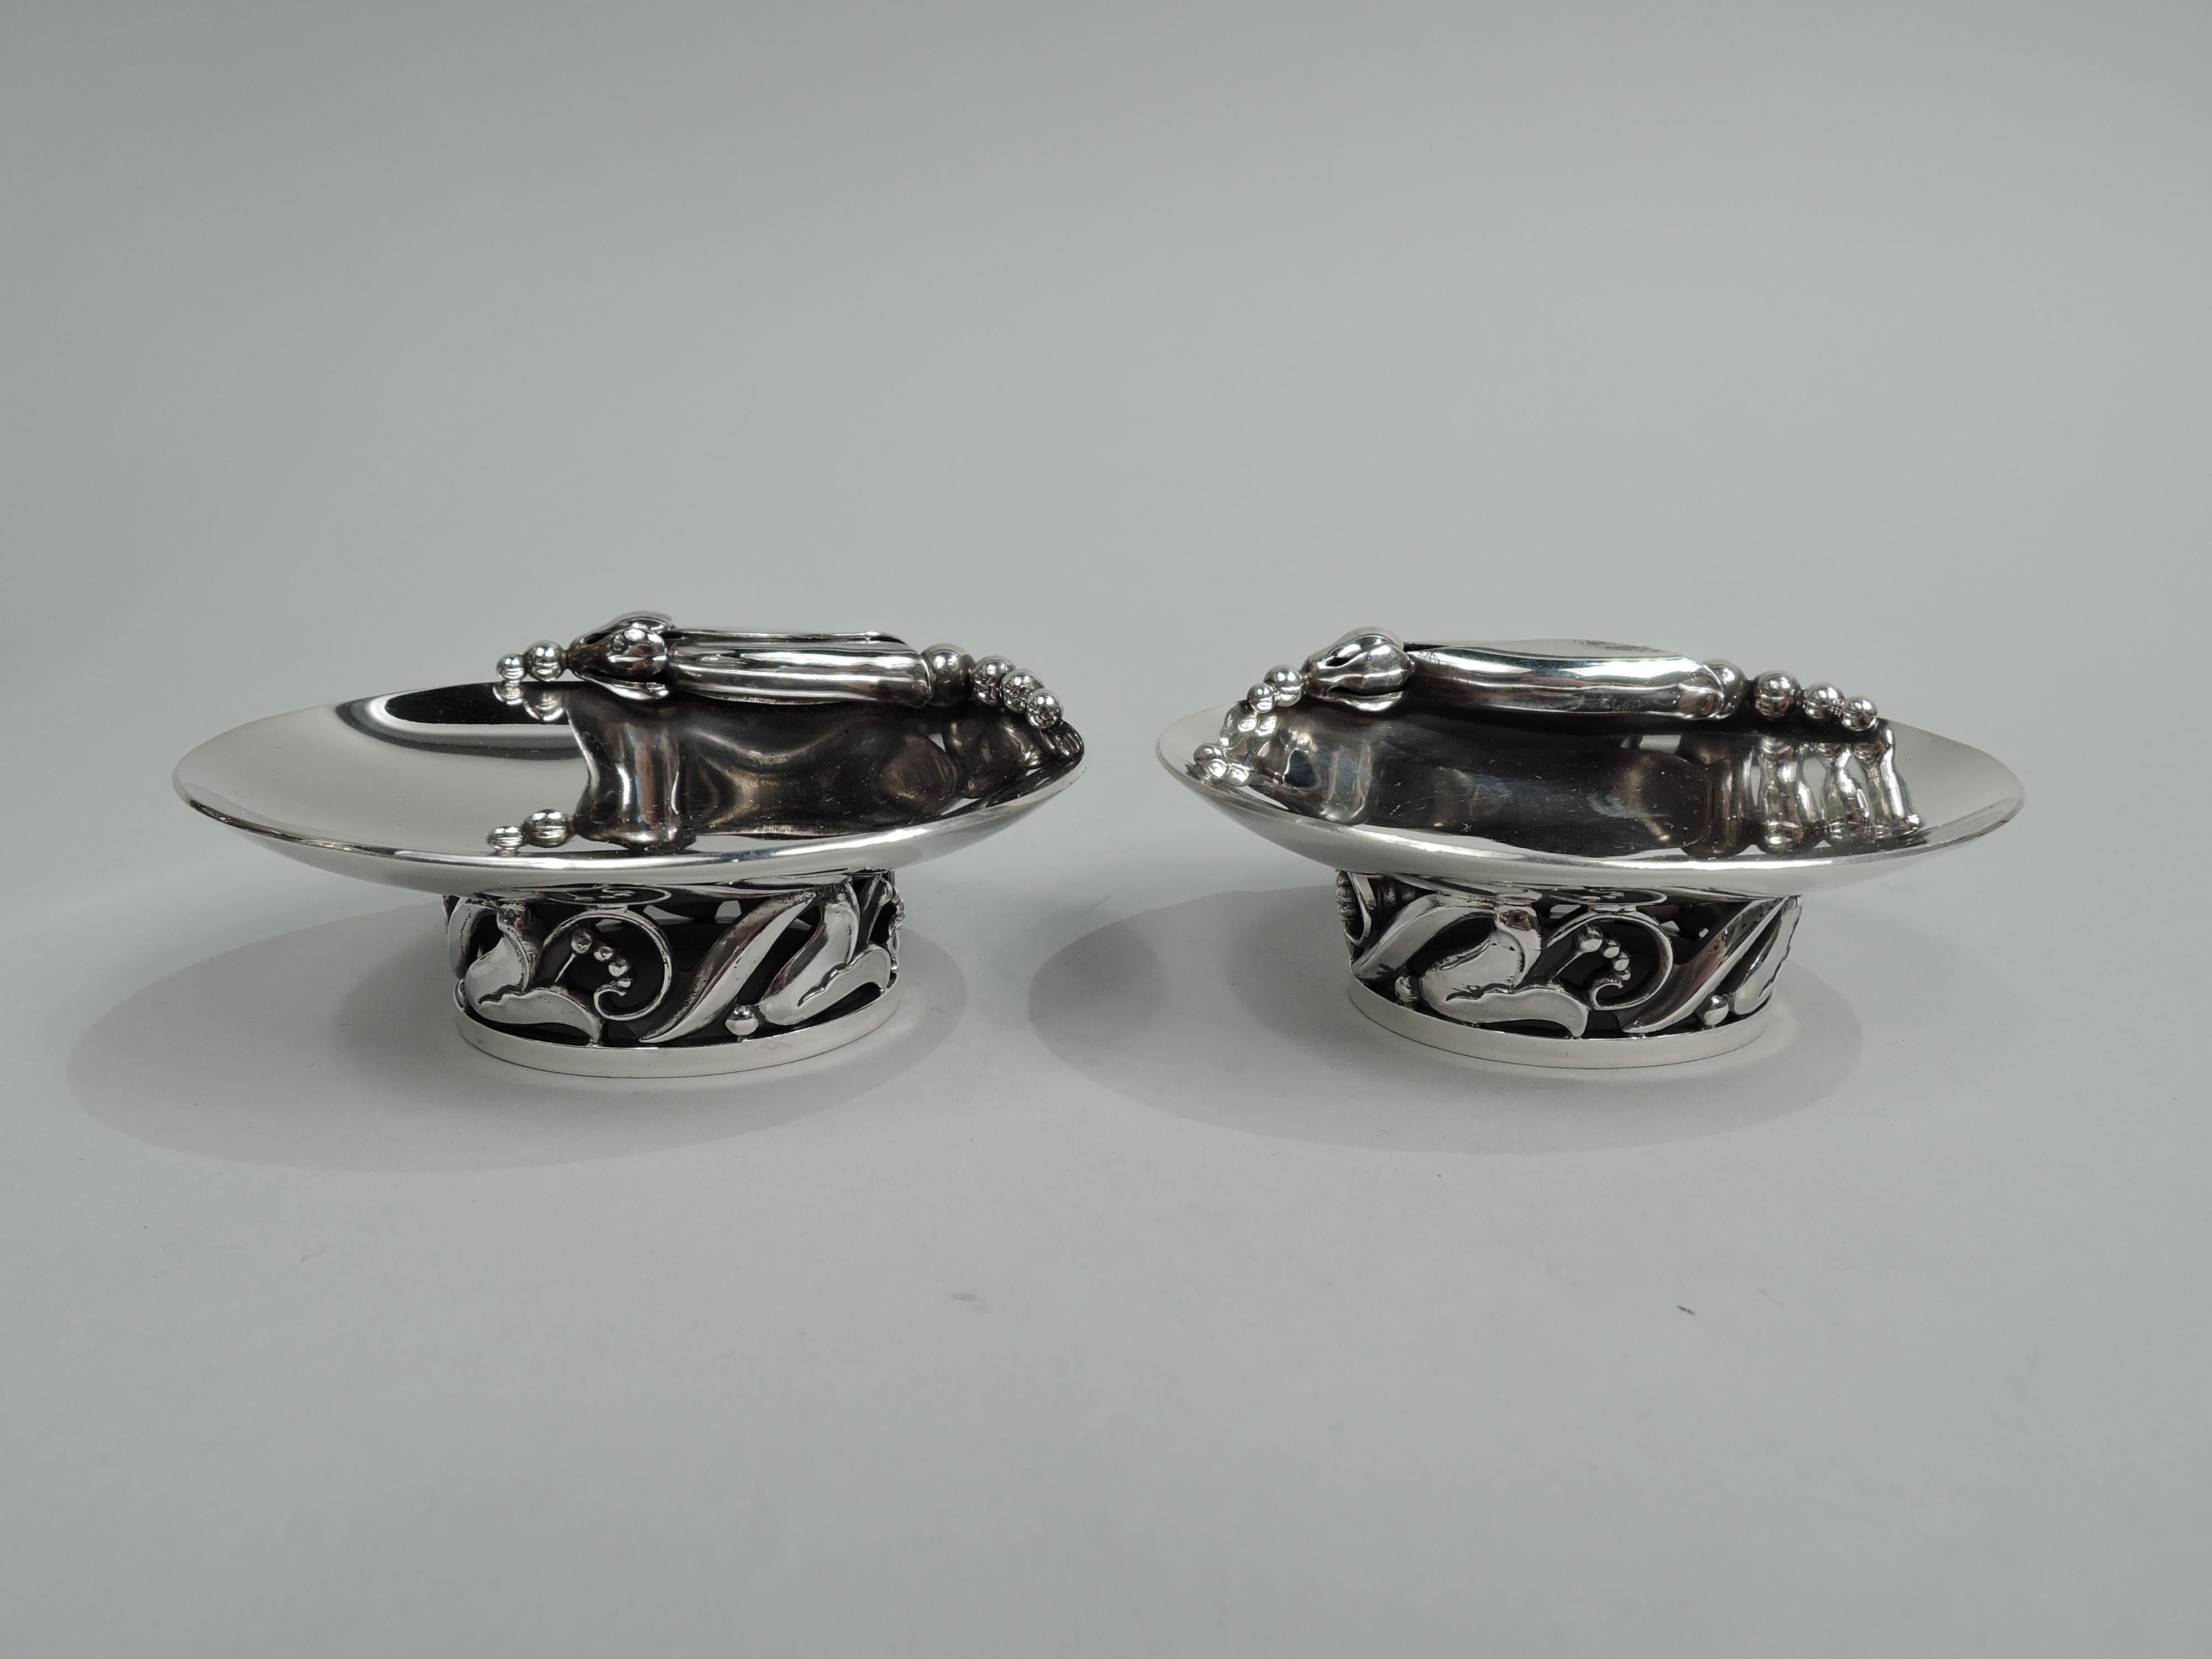 Pair of Mid-Century Modern sterling silver open salts. Made by Alphonse La Paglia (d. 1953) for Georg Jensen USA, Inc. in New York. Each: Shallow and curved oval bowl applied with Blossom-inspired seed-spilling pod. Open foot with stylized floral